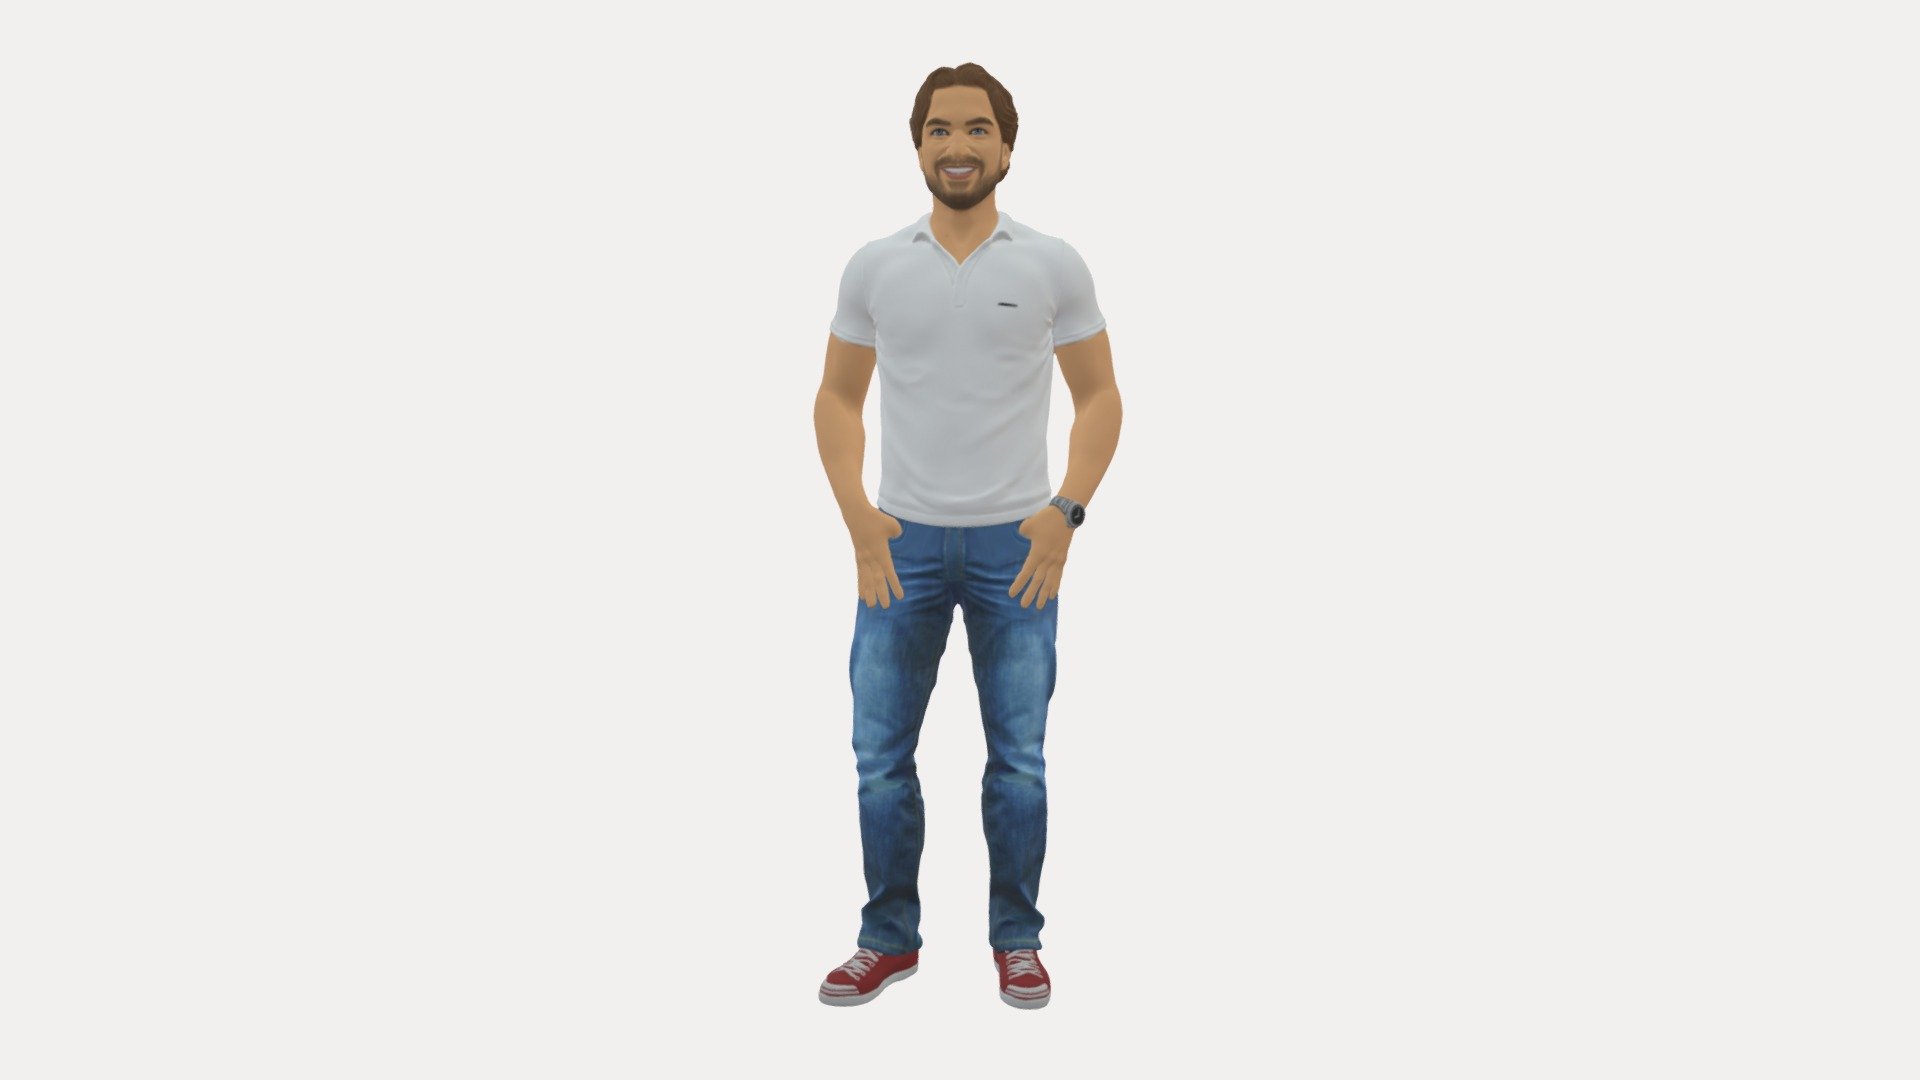 We provide unique 3d scanned models with realistic proportions for closeup and medium-distance views in artworks, paintings and classes. As well as architectural visualization projects.

Main features:




high-end realistic 3d scanned model;

realistic proportions;

highest quality;

low price;

saves you time for more time in landscaping and interiors visualization.

FEATURES 




3d scanned model 

Extremely clean

Edge Loops based

smoothable

symmetrical

professional quality UV map

high level of detail

high resolution textures

real-world scale

system unit: cm

TEXTURES 




Textural Resolution: 4096 x 4096

Color Map

The model is suitable for stereolithography 3d printing 

The model is also ready for fullcolour 3d printing - Smiling Man In White Polo 0790 - Buy Royalty Free 3D model by 3DFarm 3d model